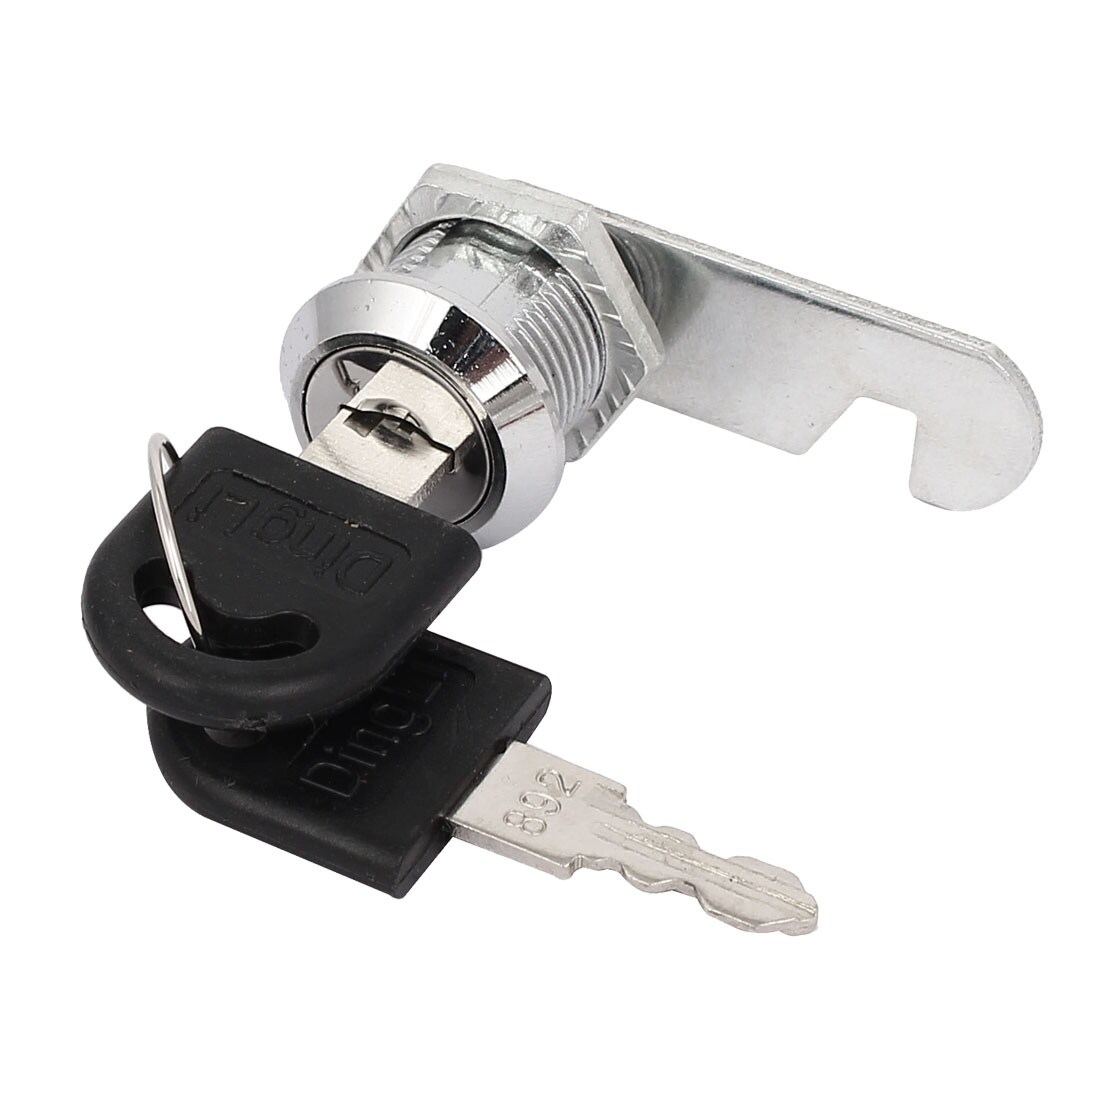 5mmx38mm Dia Pin Safety Guard Tubular Cylinder Cam Lock for Cabinet -  Silver Tone - Bed Bath & Beyond - 35708330